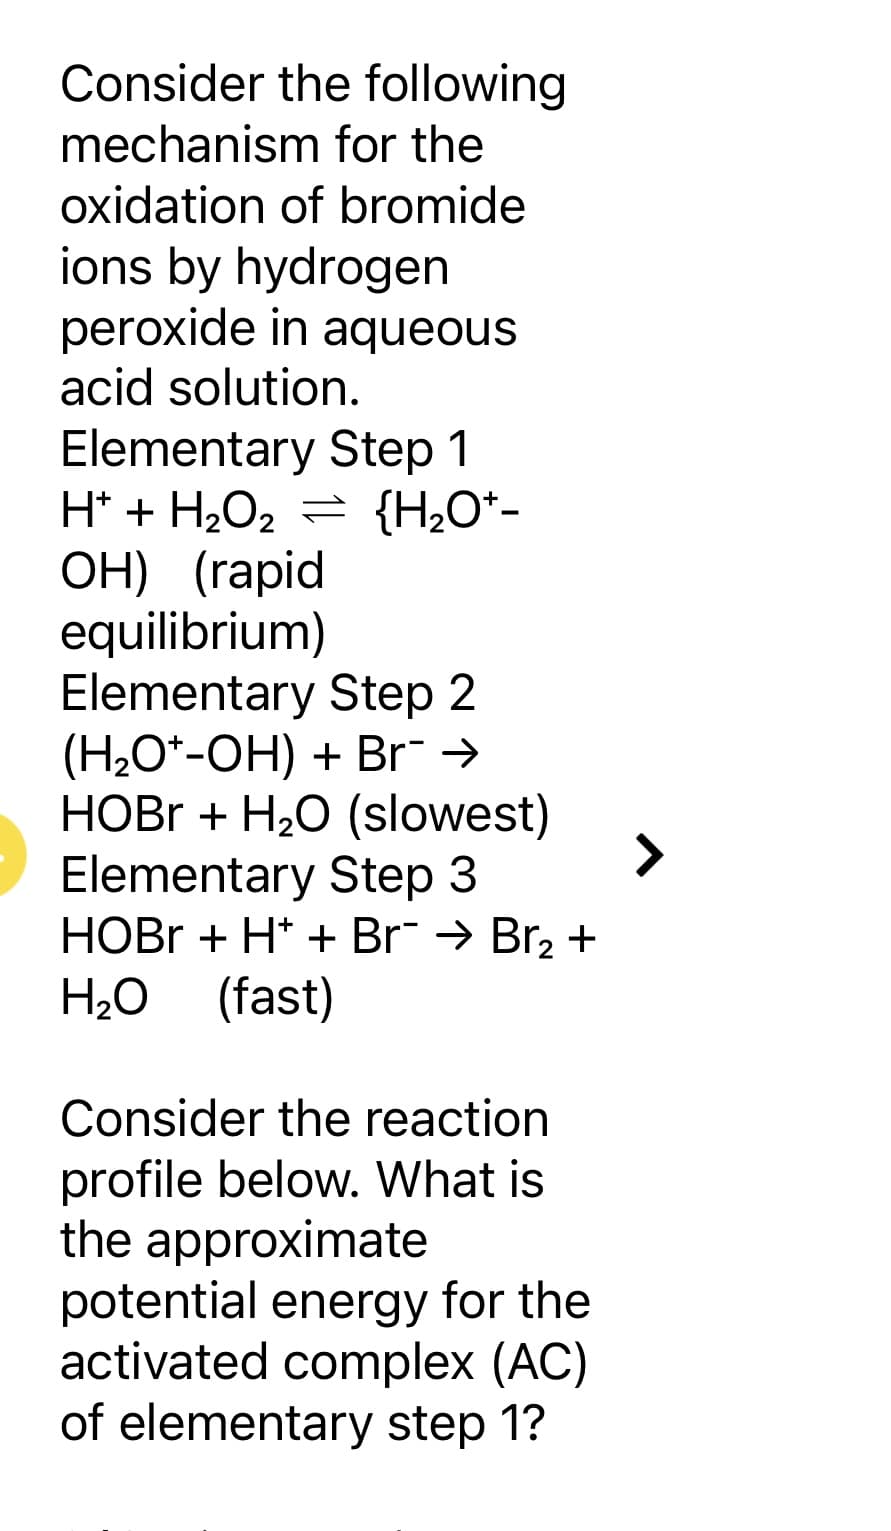 Consider the following
mechanism for the
oxidation of bromide
ions by hydrogen
peroxide in aqueous
acid solution.
Elementary Step 1
H* + H₂O₂ = {H₂O*-
OH) (rapid
equilibrium)
Elementary Step 2
(H₂O*-OH) + Br¯ →
HOBr + H₂O (slowest)
Elementary Step 3
HOBr + H+ + Br¯ → Br₂ +
H₂O (fast)
Consider the reaction
profile below. What is
the approximate
potential energy for the
activated complex (AC)
of elementary step 1?